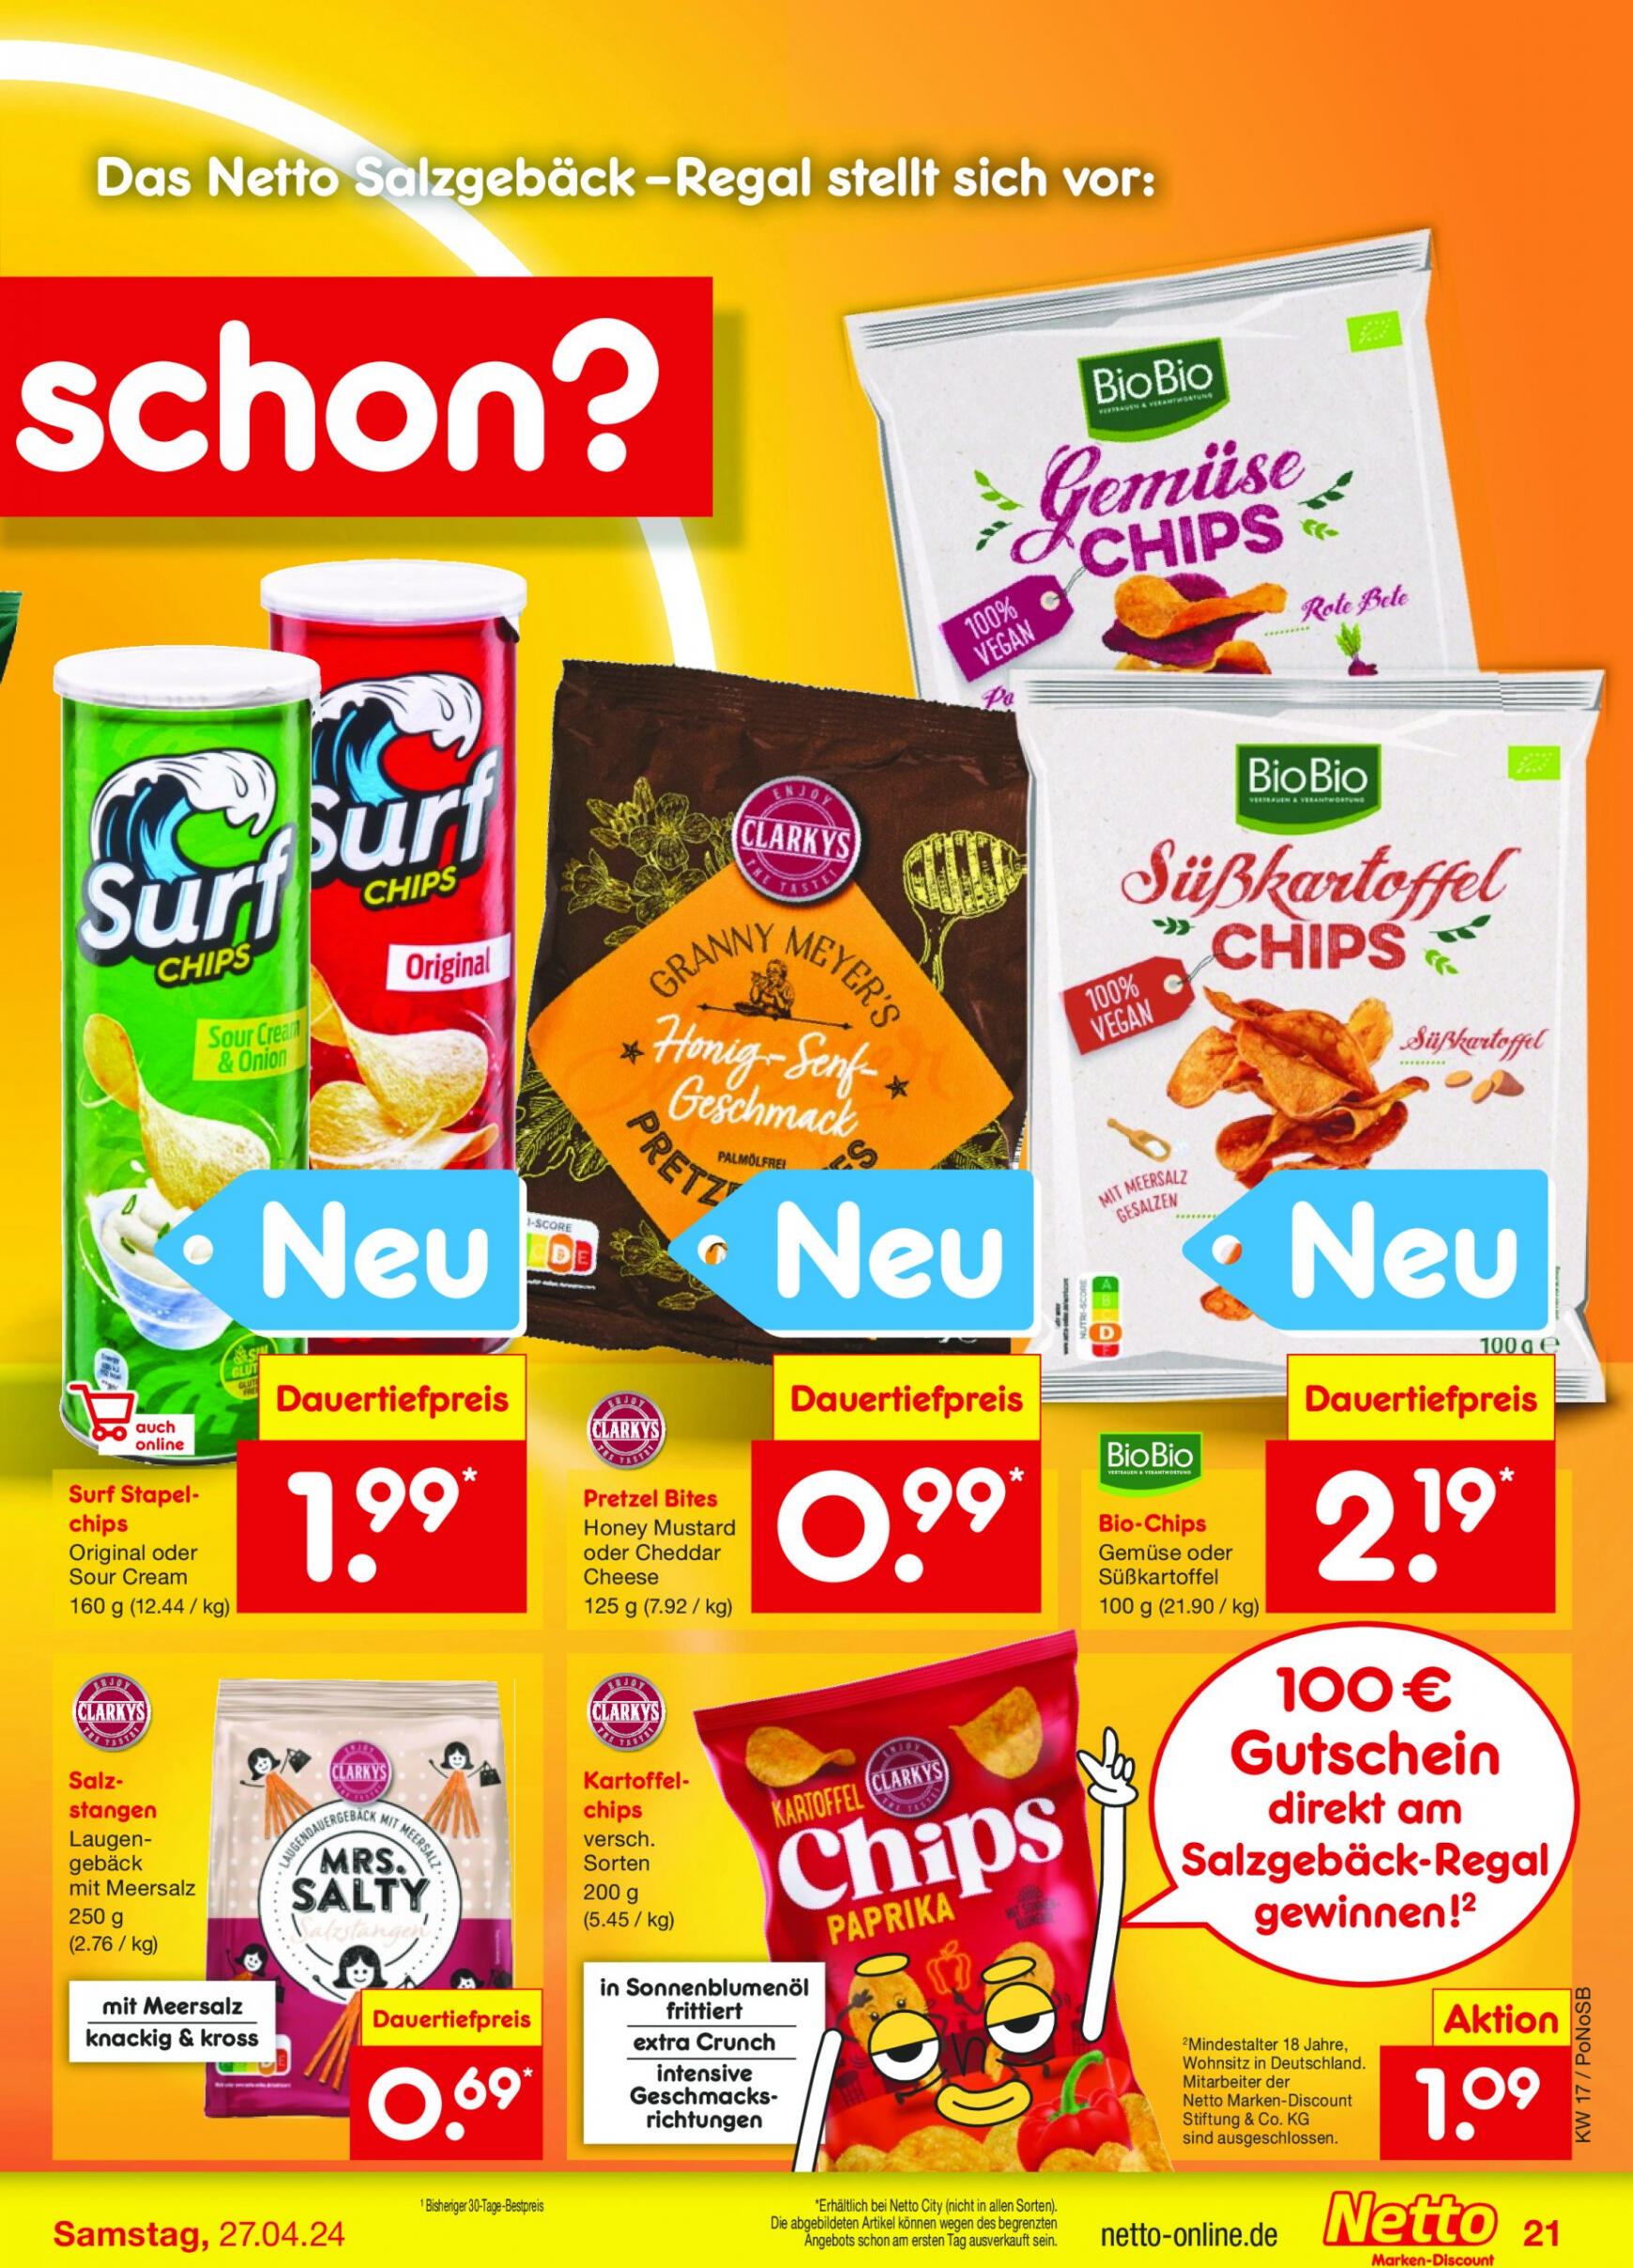 netto - Flyer Netto aktuell 22.04. - 27.04. - page: 23